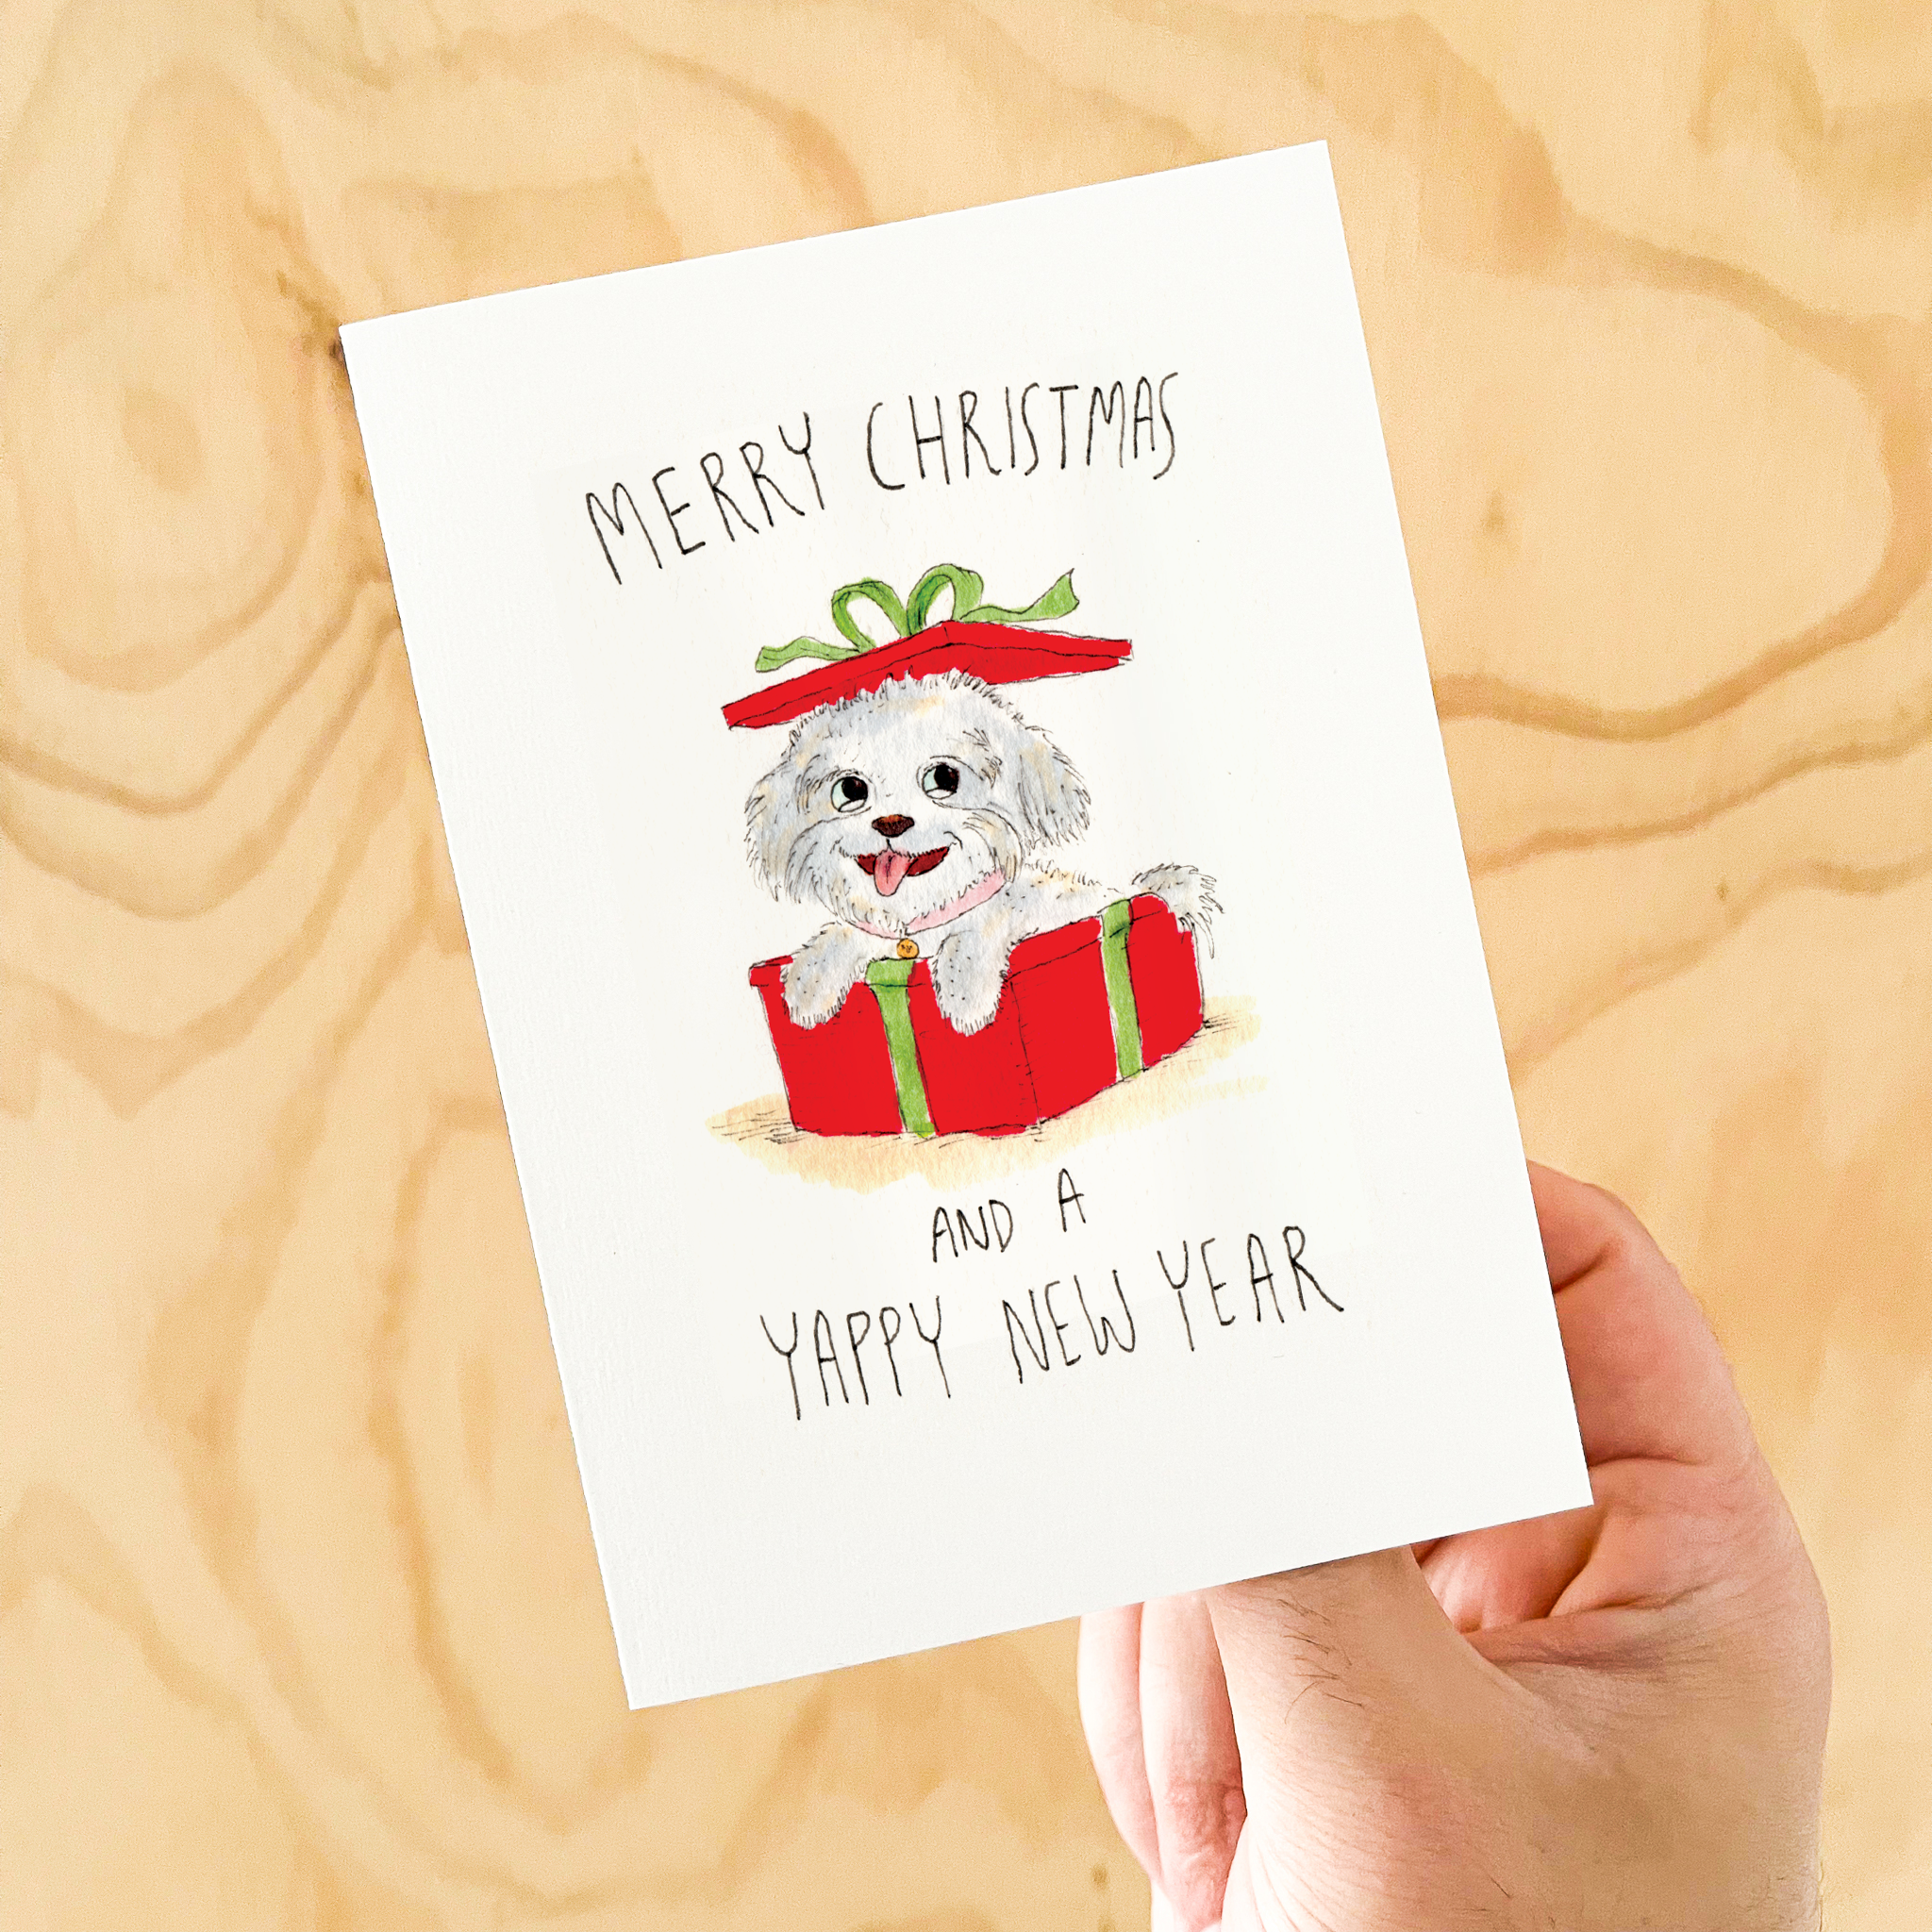 Merry Christmas and a Yappy New Year - Well Drawn